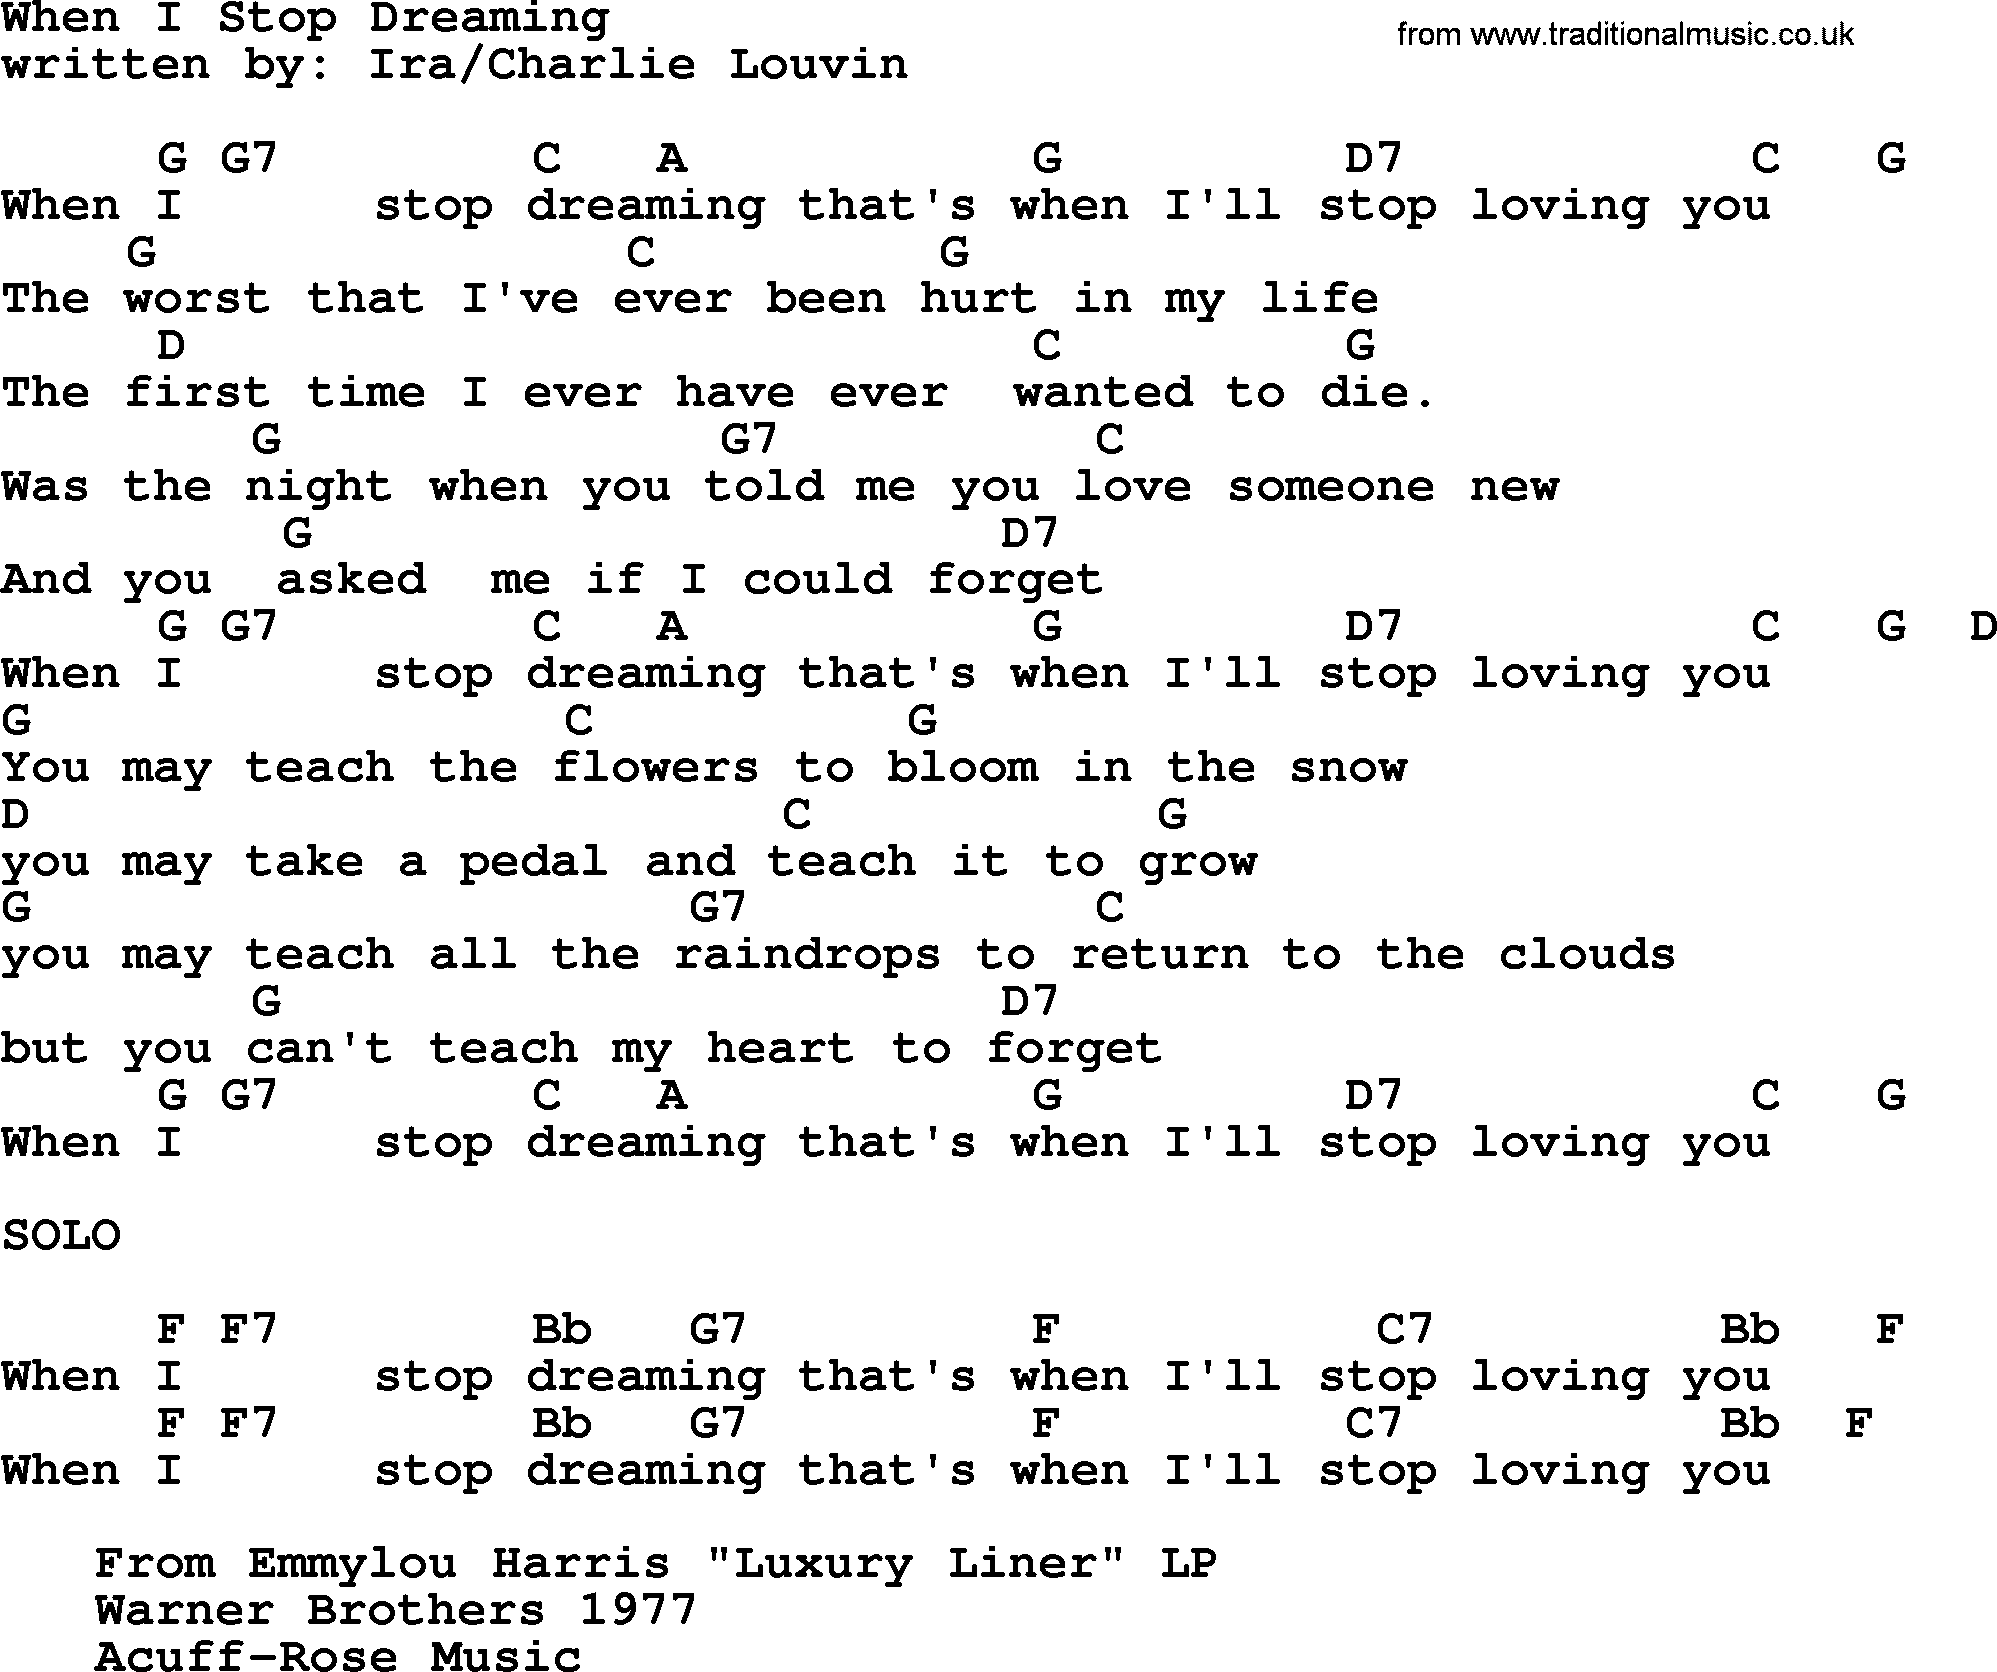 Emmylou Harris song: When I Stop Dreaming lyrics and chords